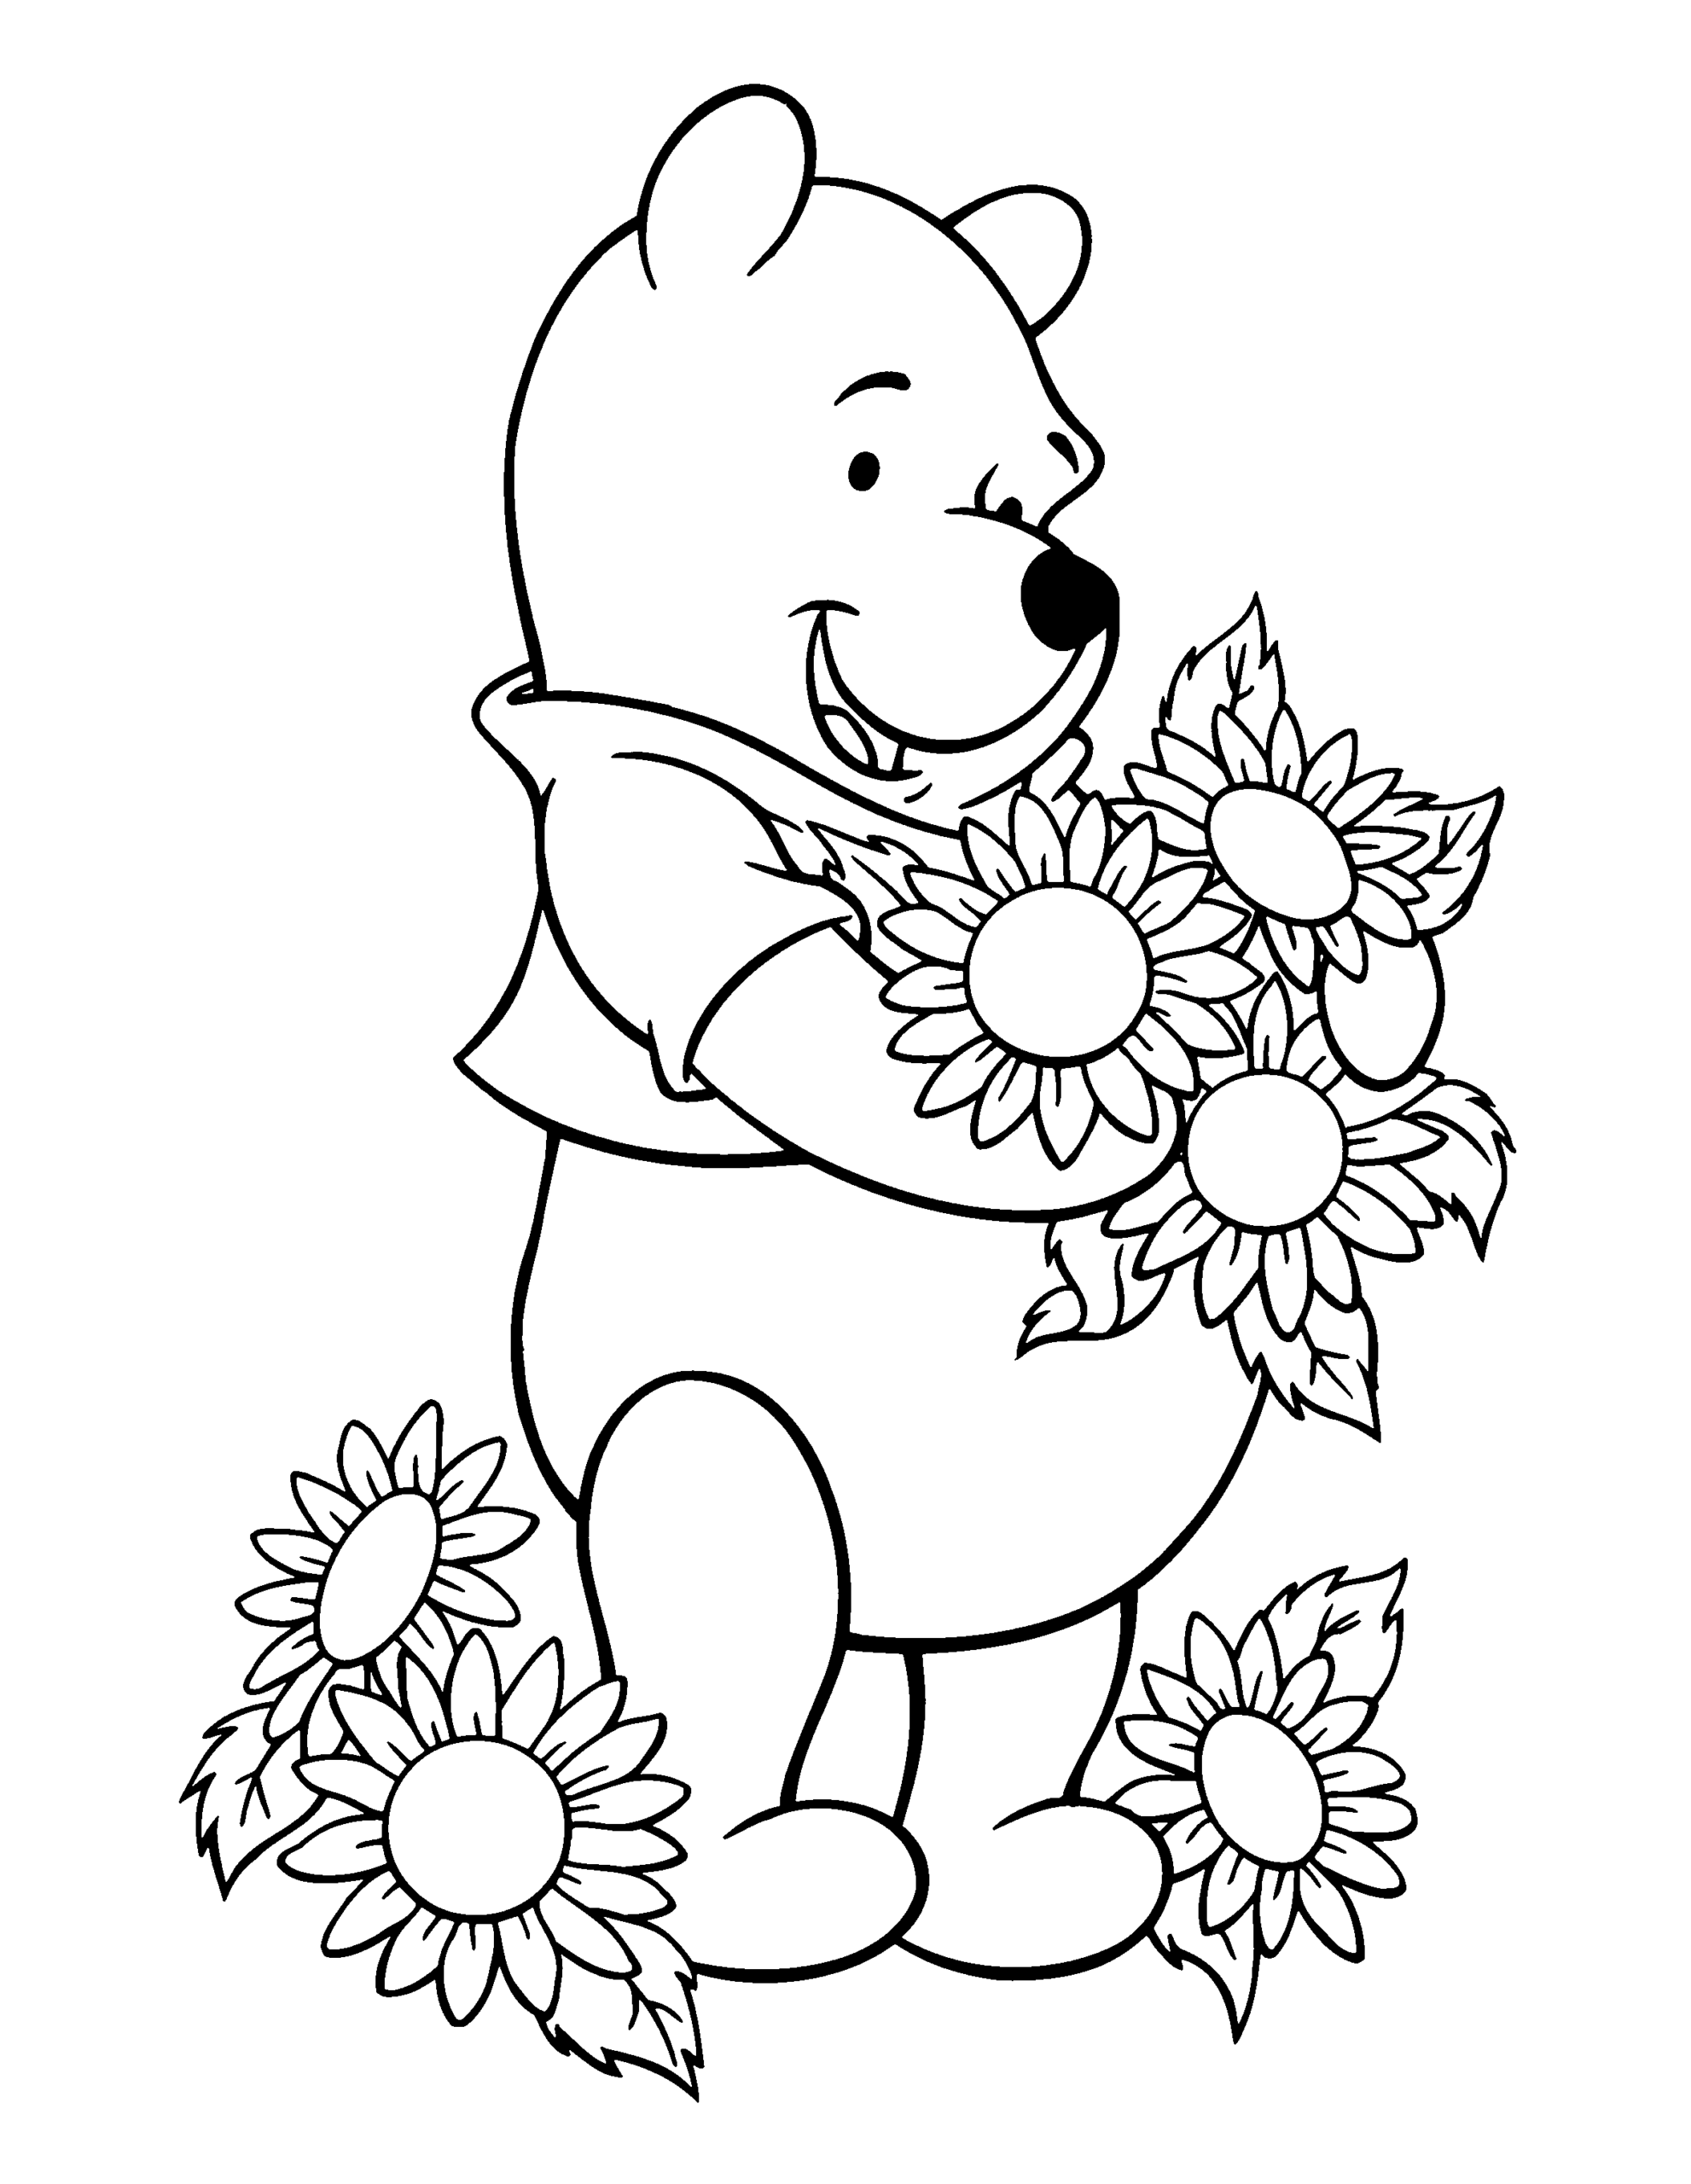 Winnie the Pooh Coloring Pages Cartoons Winnie The Pooh Online Printable 2020 7226 Coloring4free